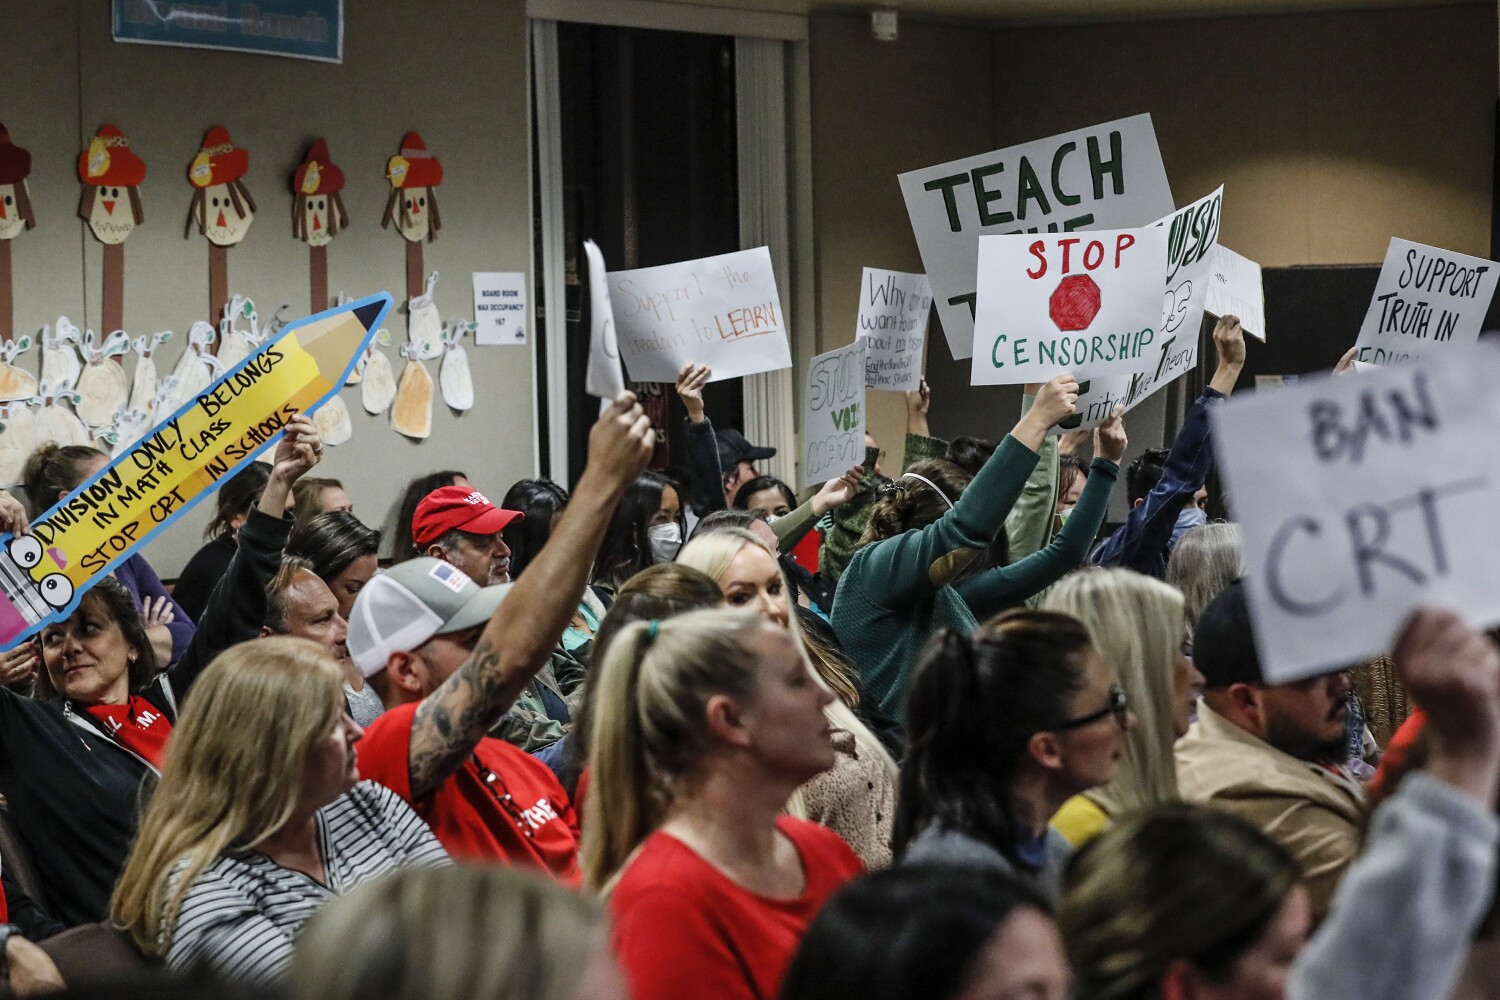 Wrenching struggle to define critical race theory divides an Orange County school district